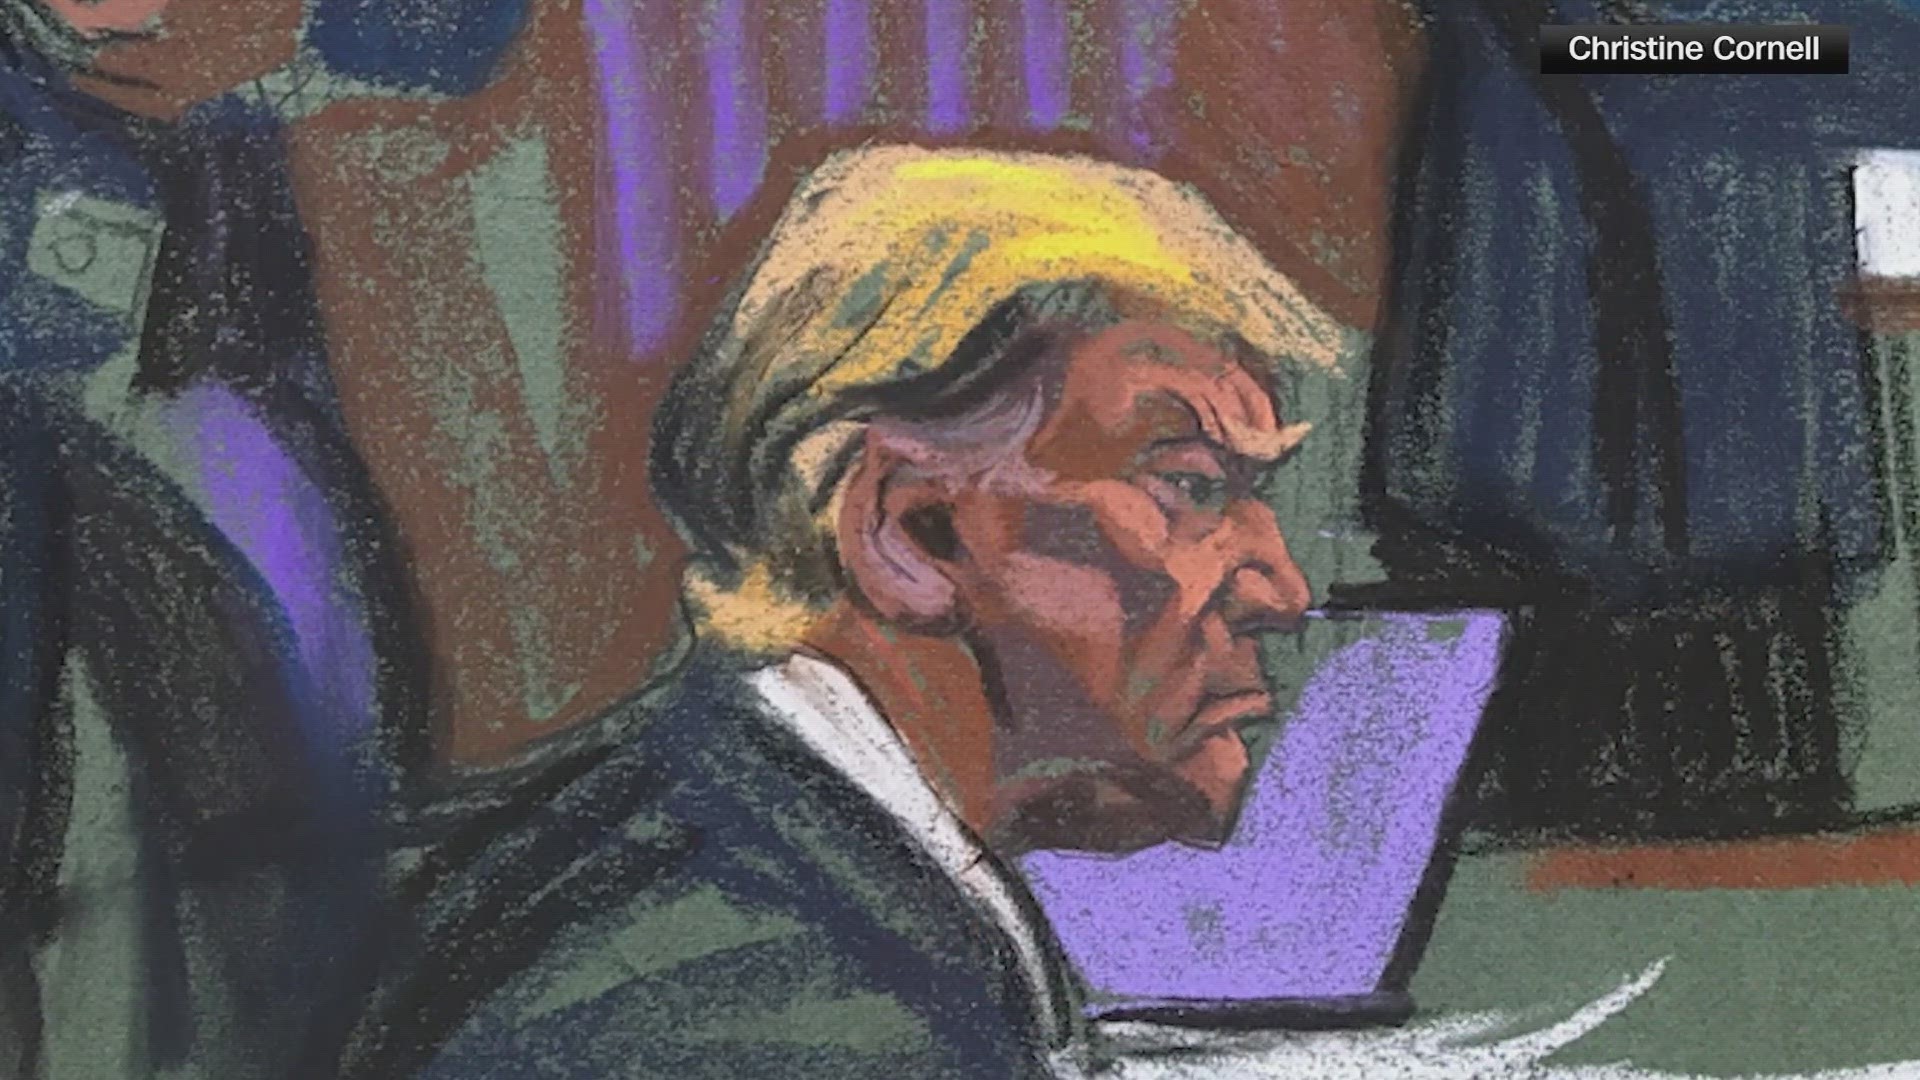 Former president Trump has pleaded not guilty to 34 counts of falsifying business records.